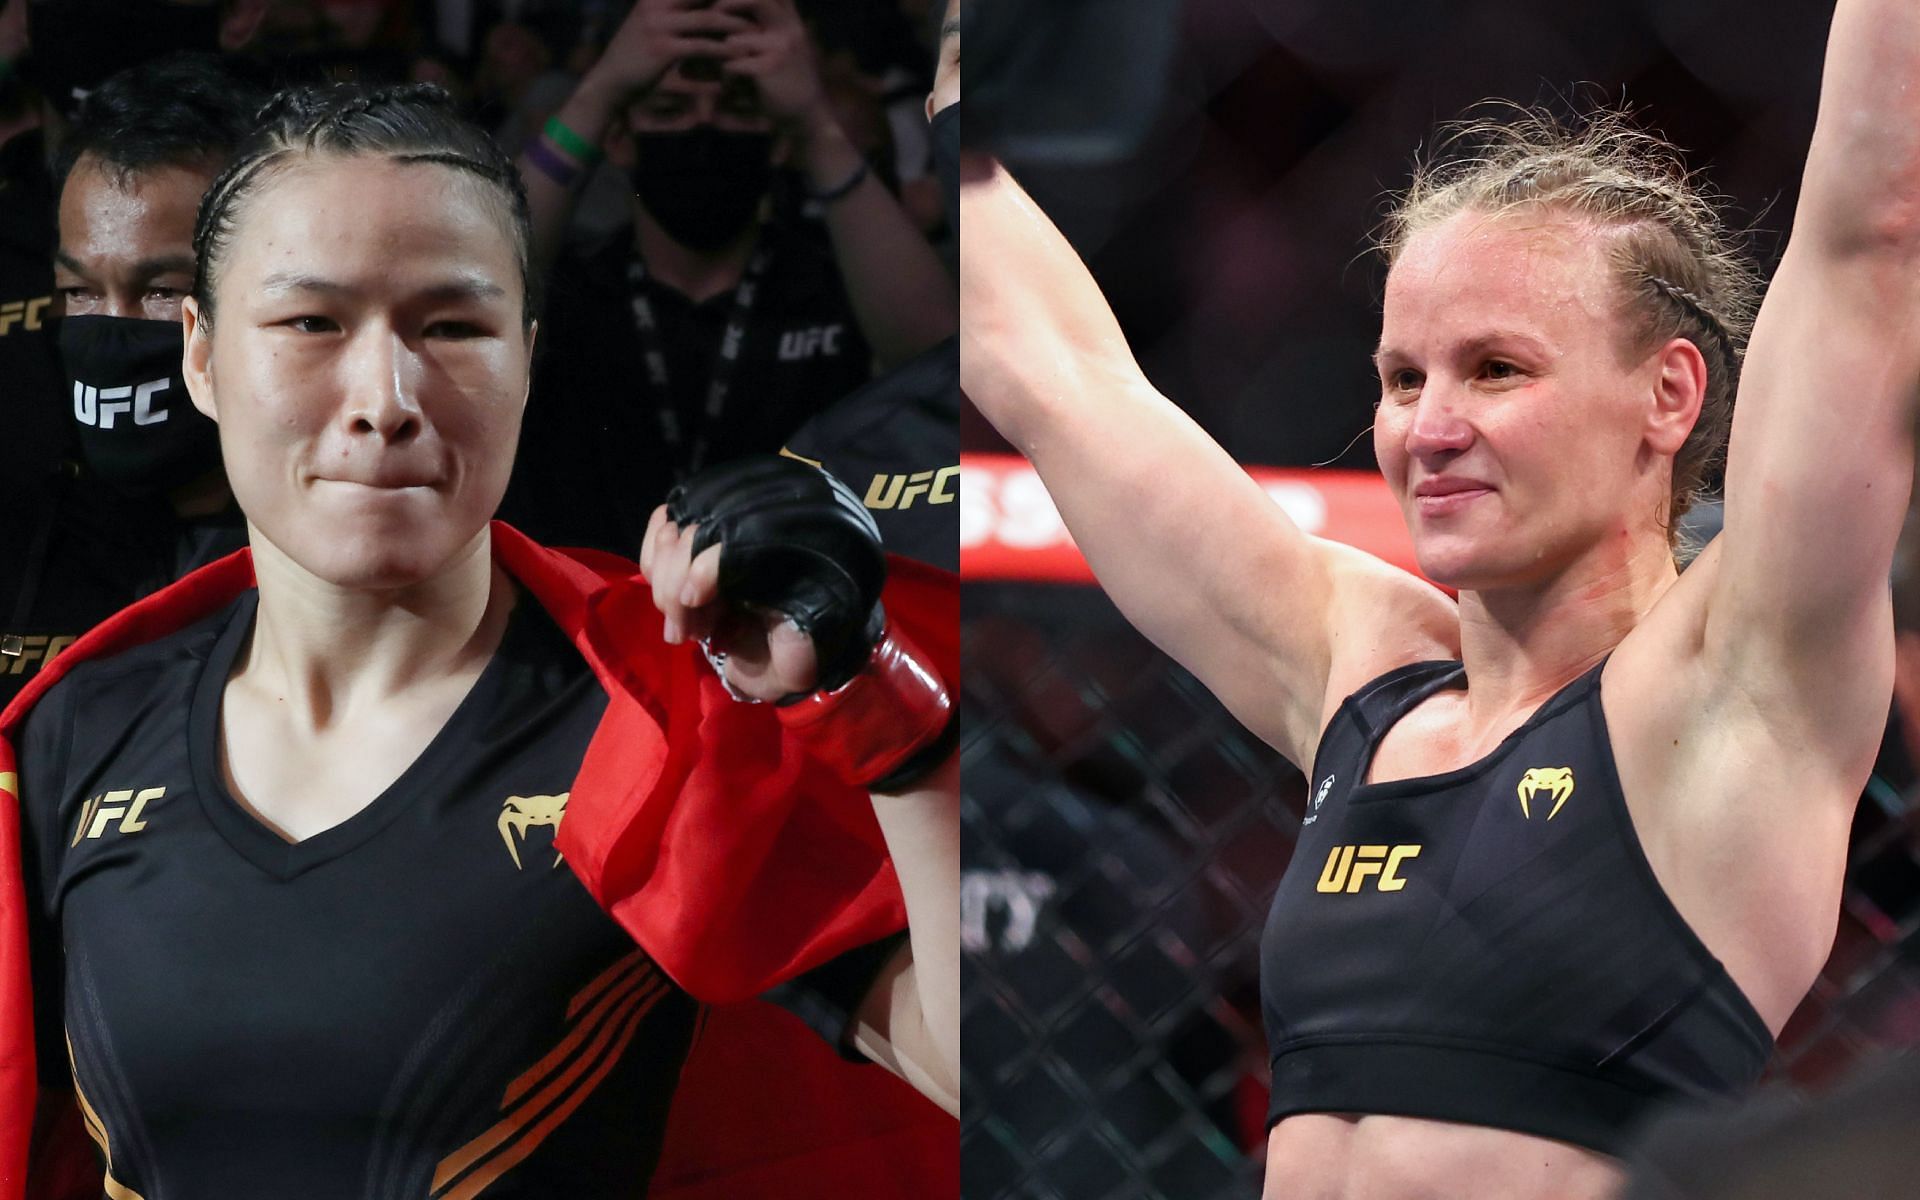 Zhang Weili (left) and Valentina Shevchenko (right) [Image courtesy: Getty Images]